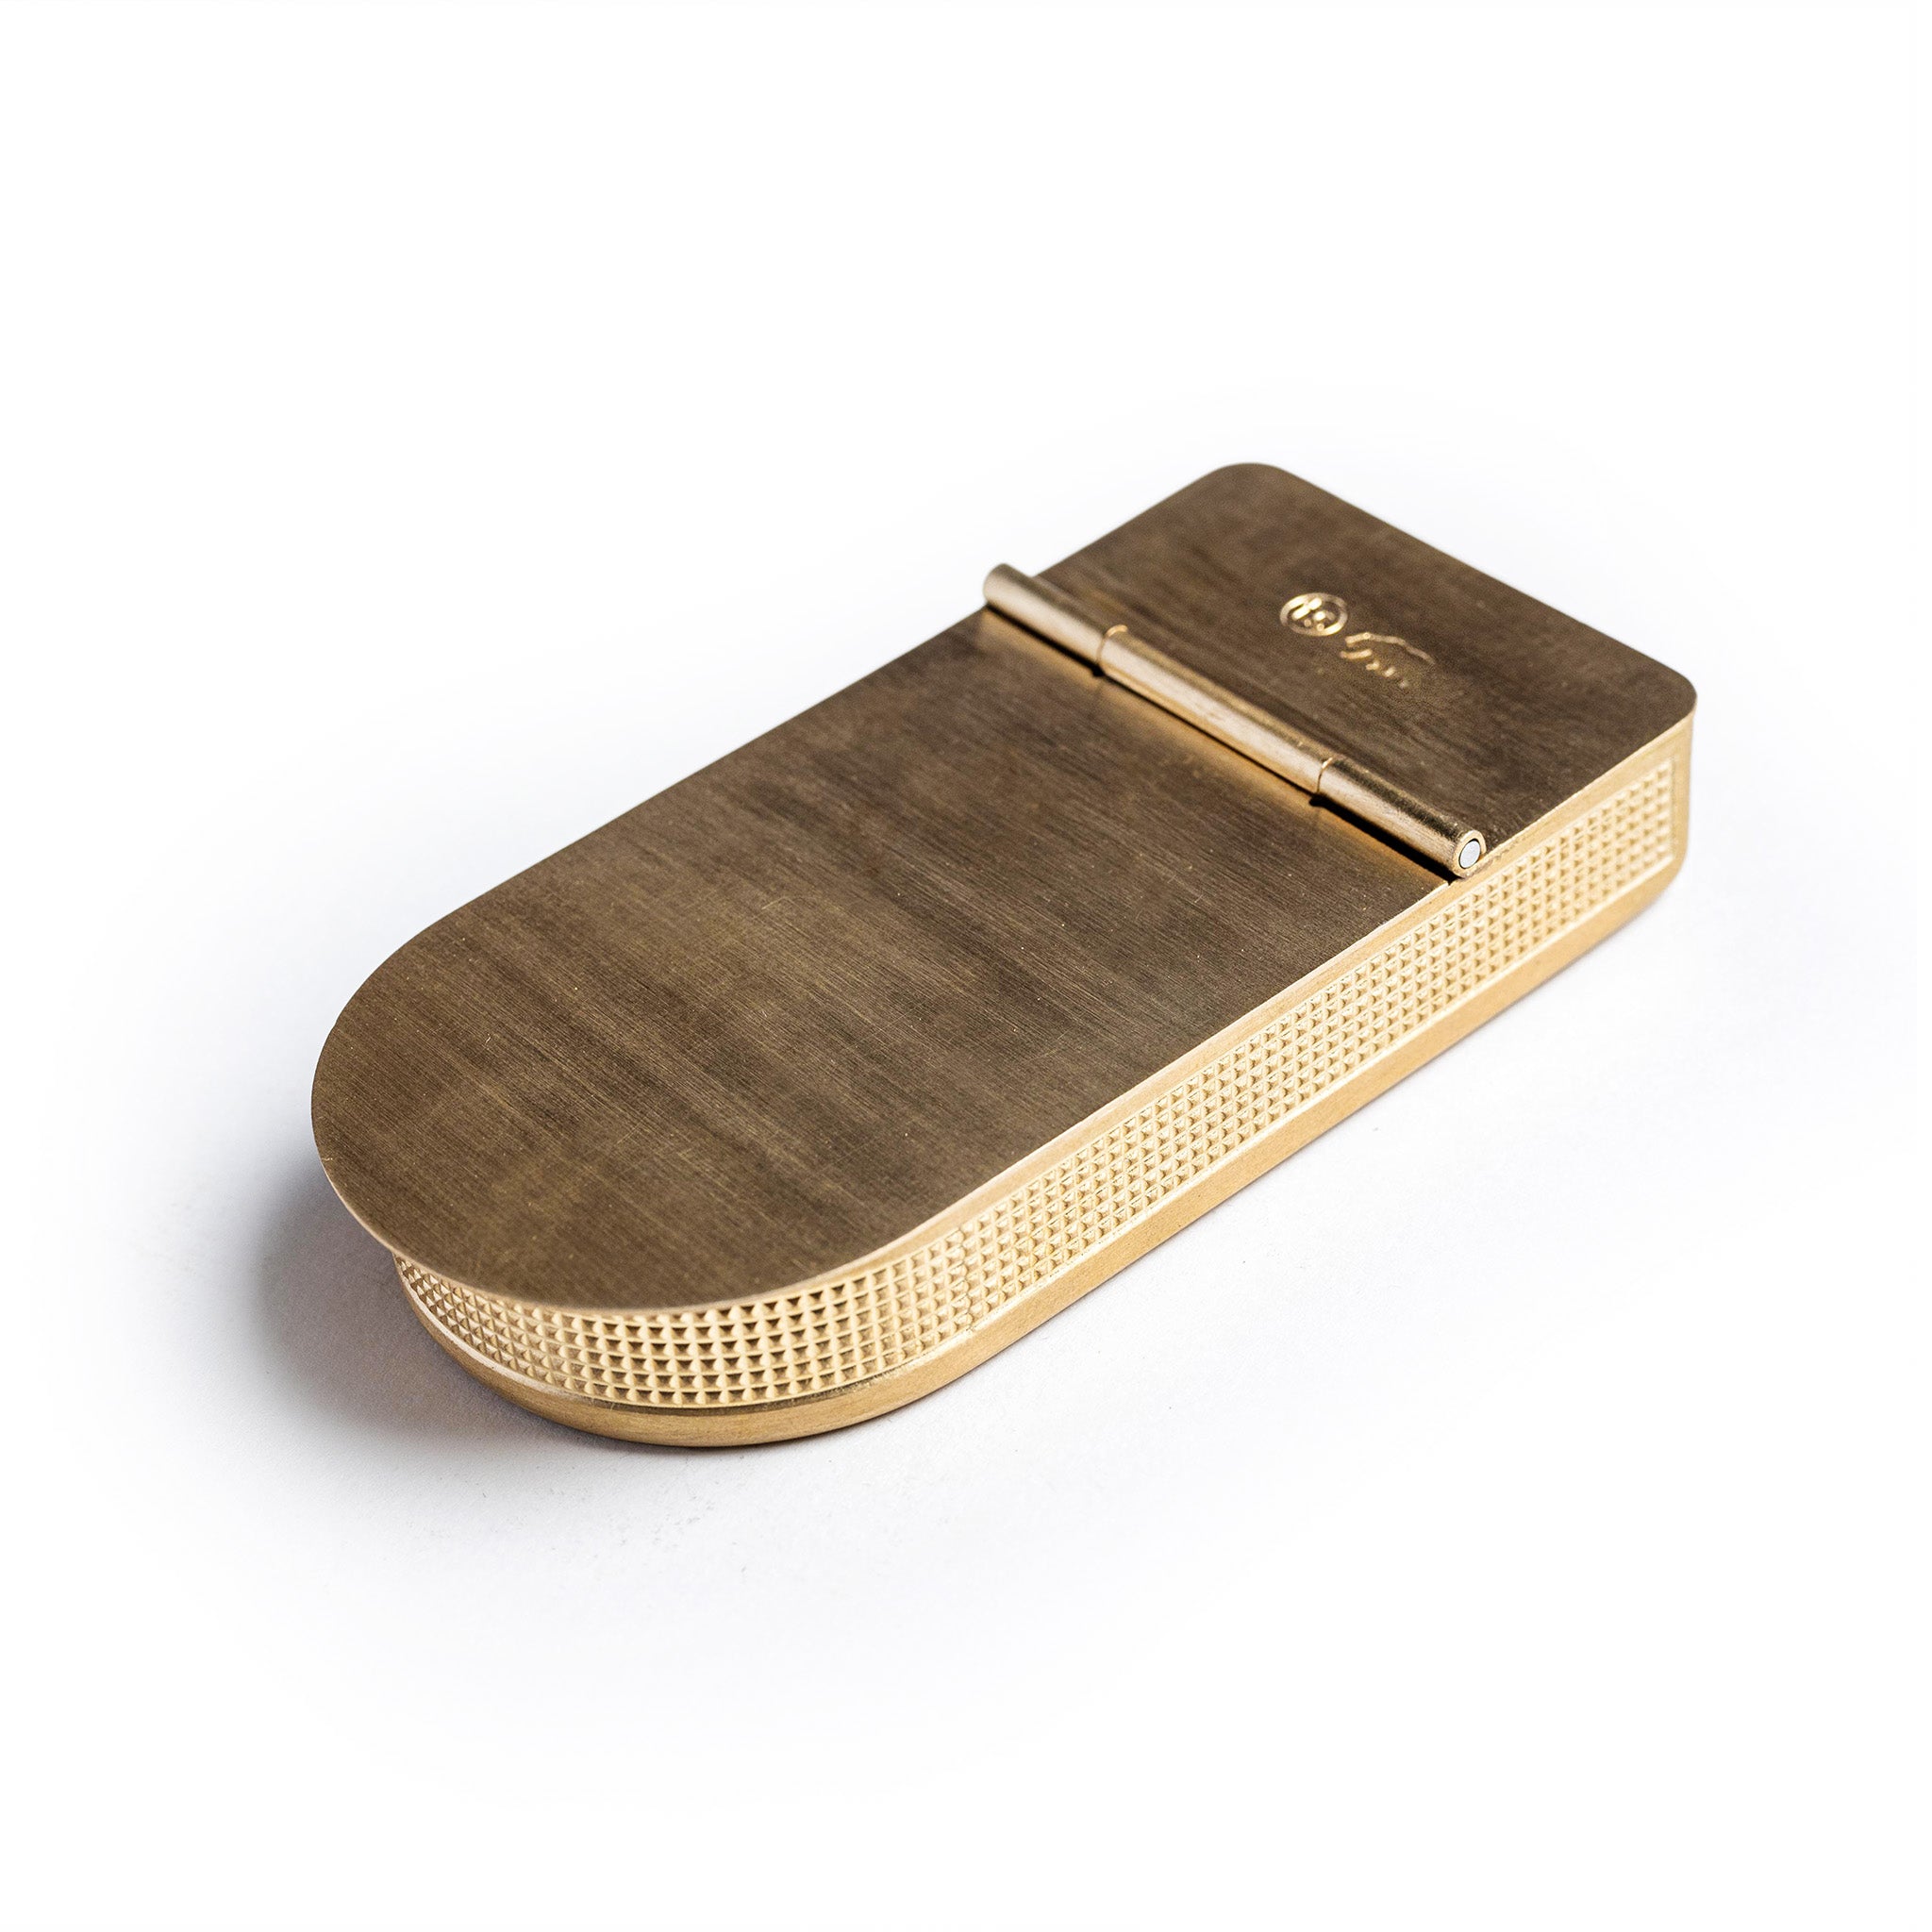 The Tinder Box in Brass  Taylor Stitch - Classic Men's Clothing